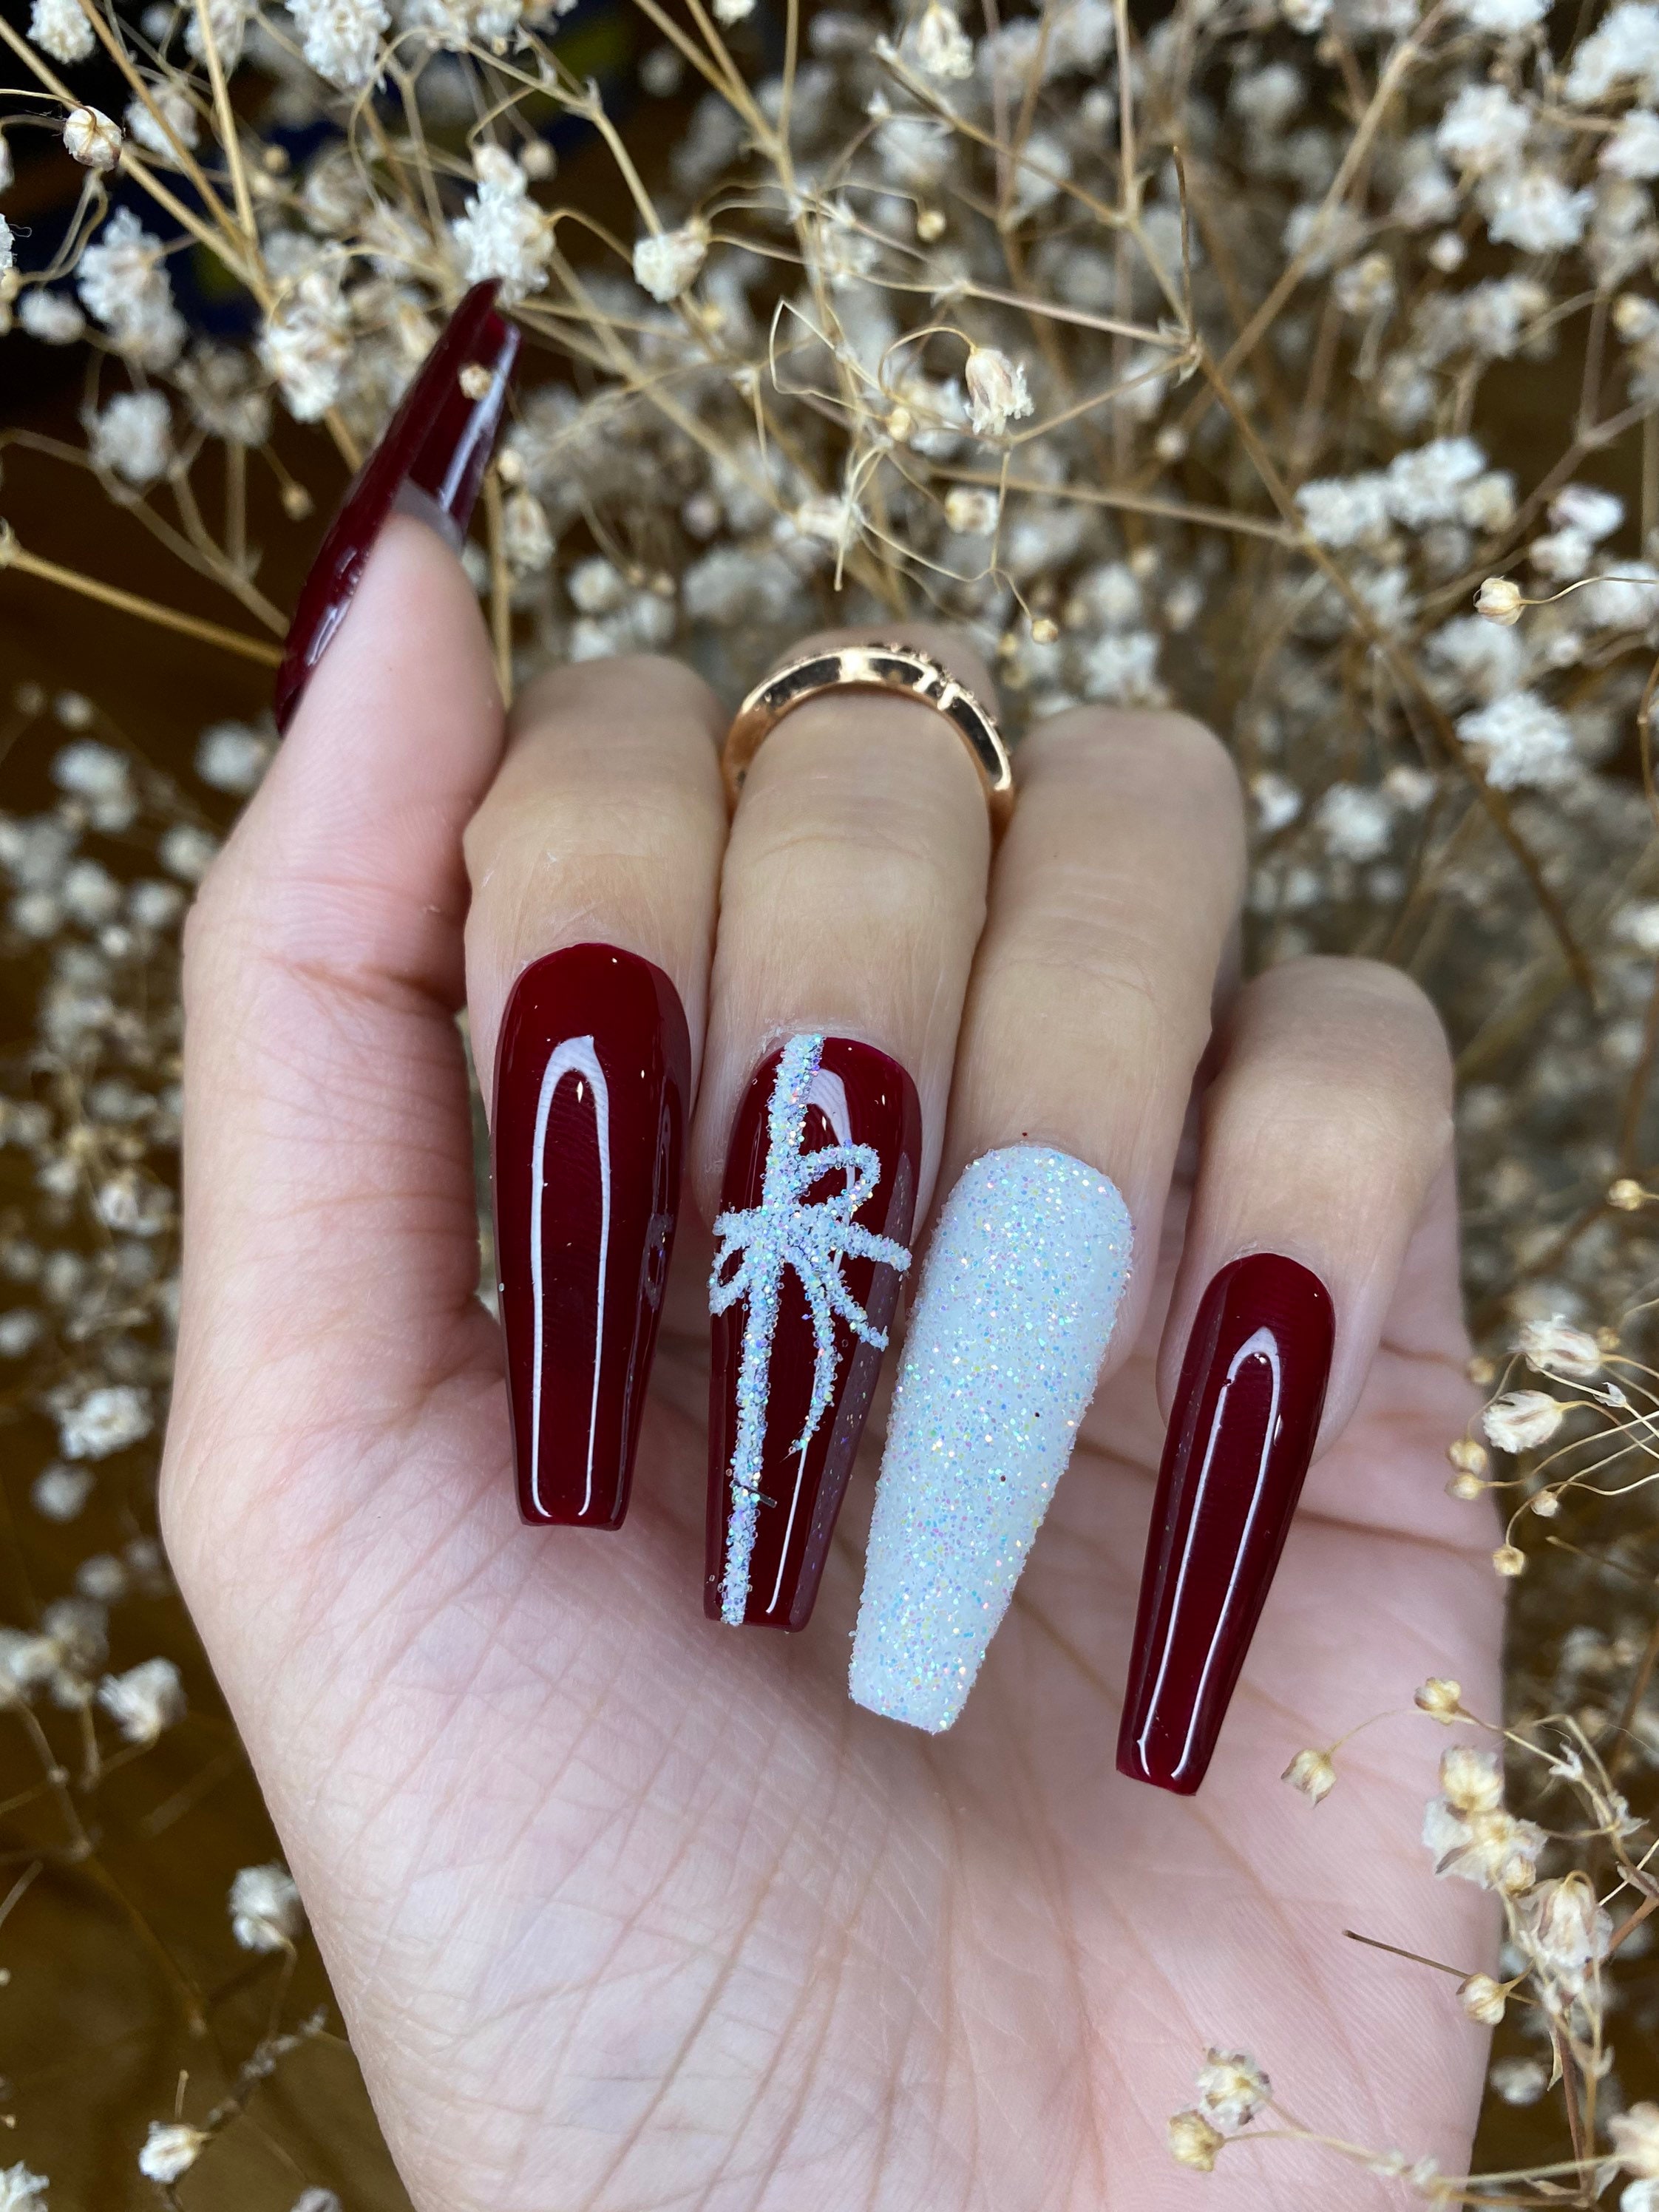 28 Pcs Red Gloss Press on Nails Coffin Mid Coffin Nails, Nails Press On,  Fake Nails, Glue on Nails, Stick on Nails, Nails With Designs - Etsy Denmark